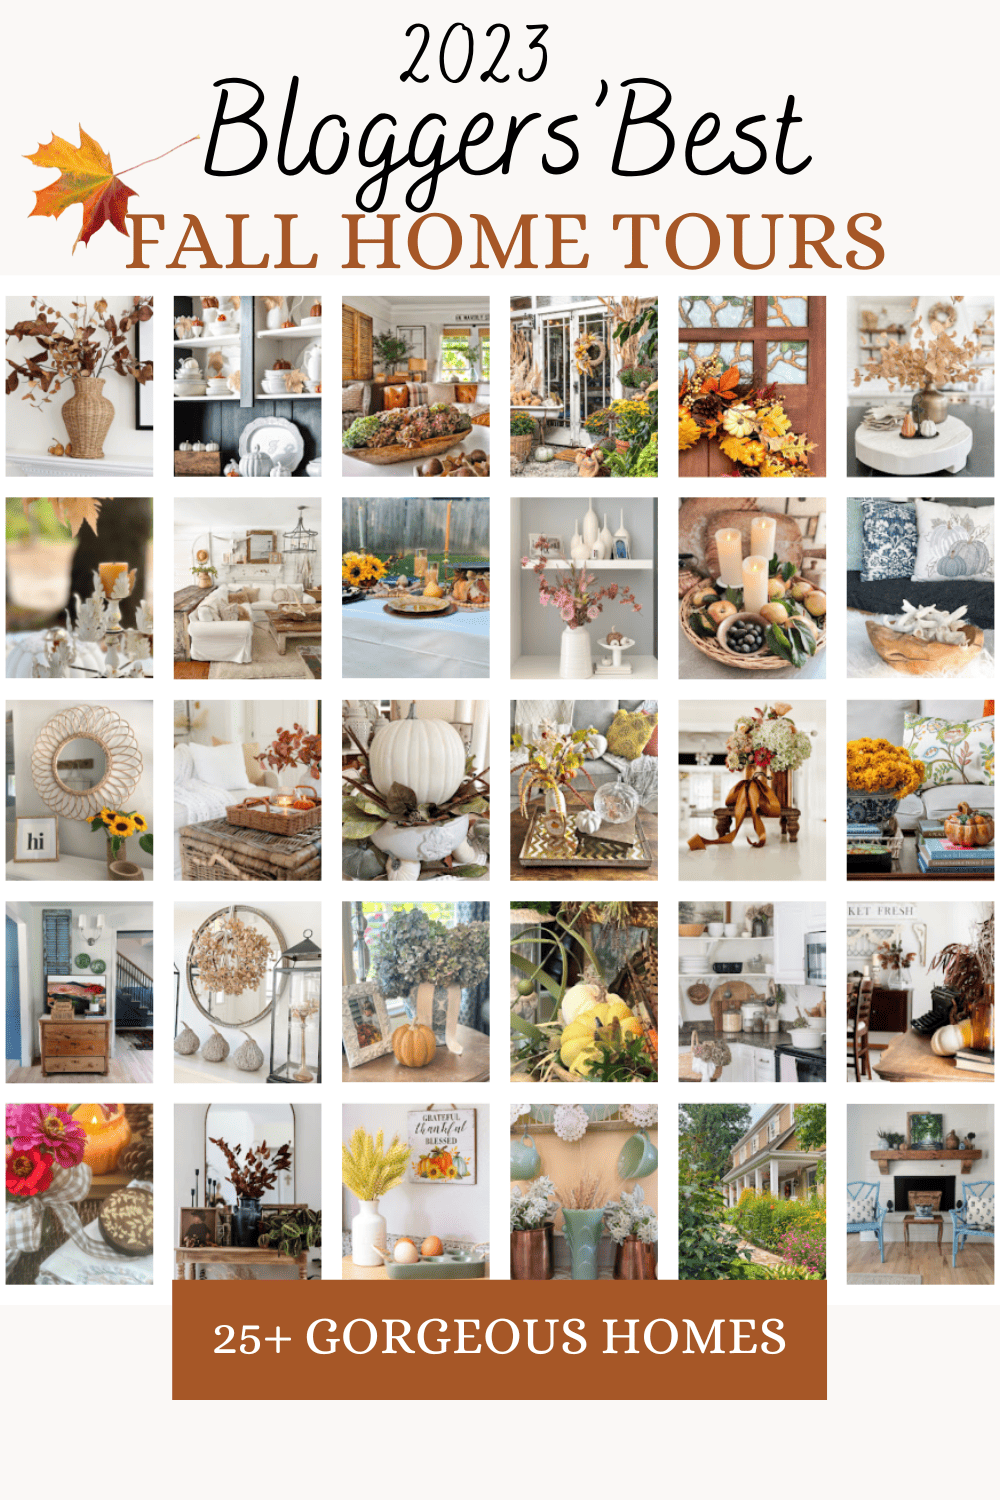 Pinterest image for fall home tour bloghop